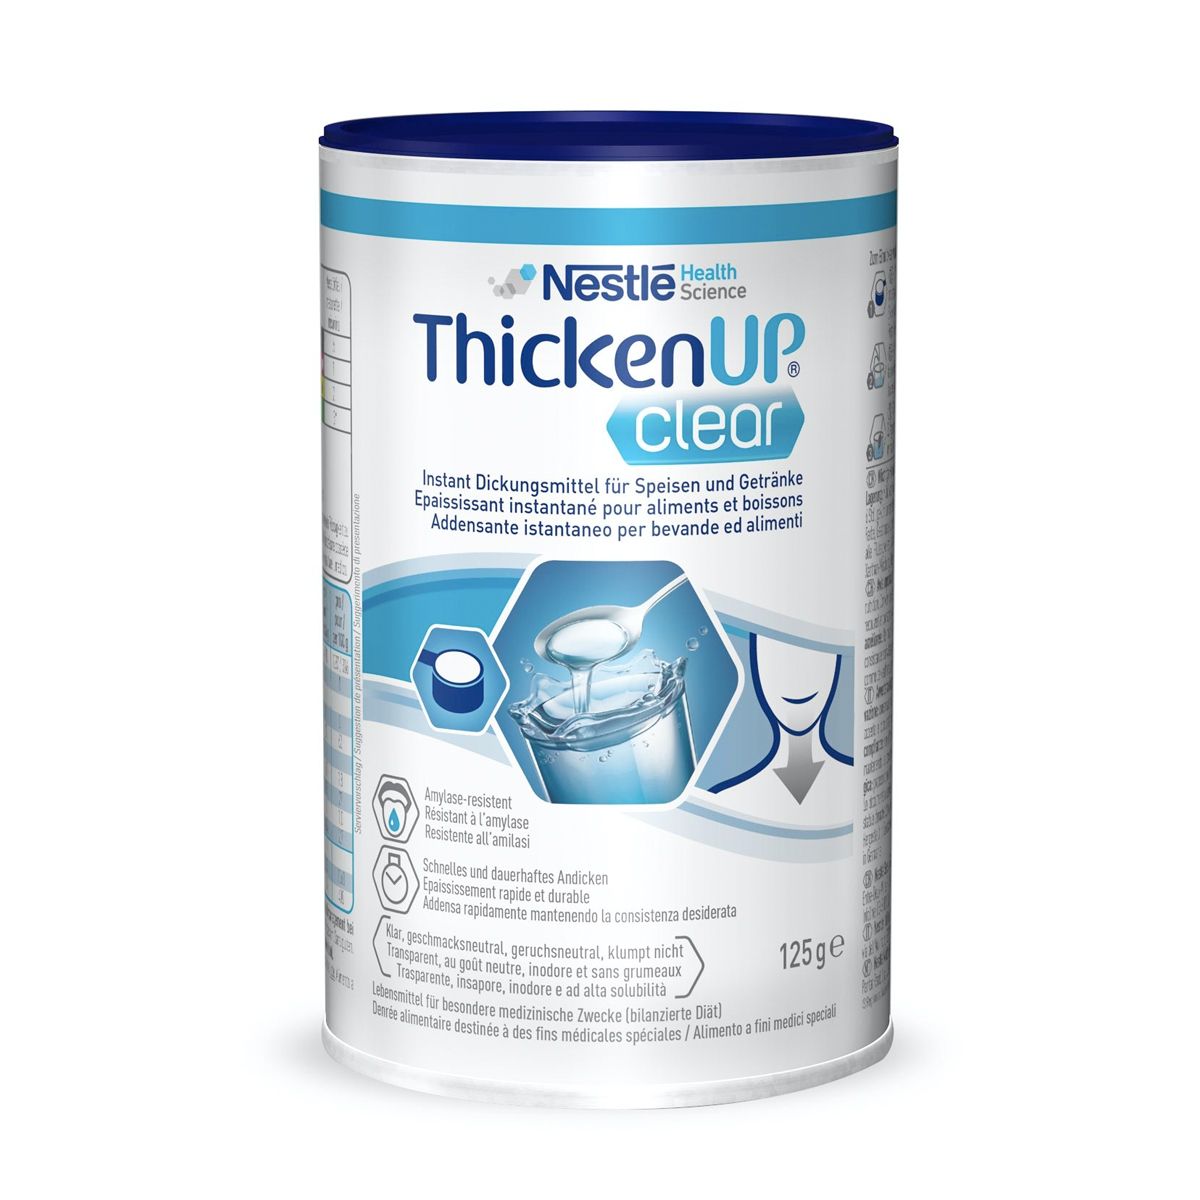 Nestle' Thickenup Clear Addensante Istantaneo 125g